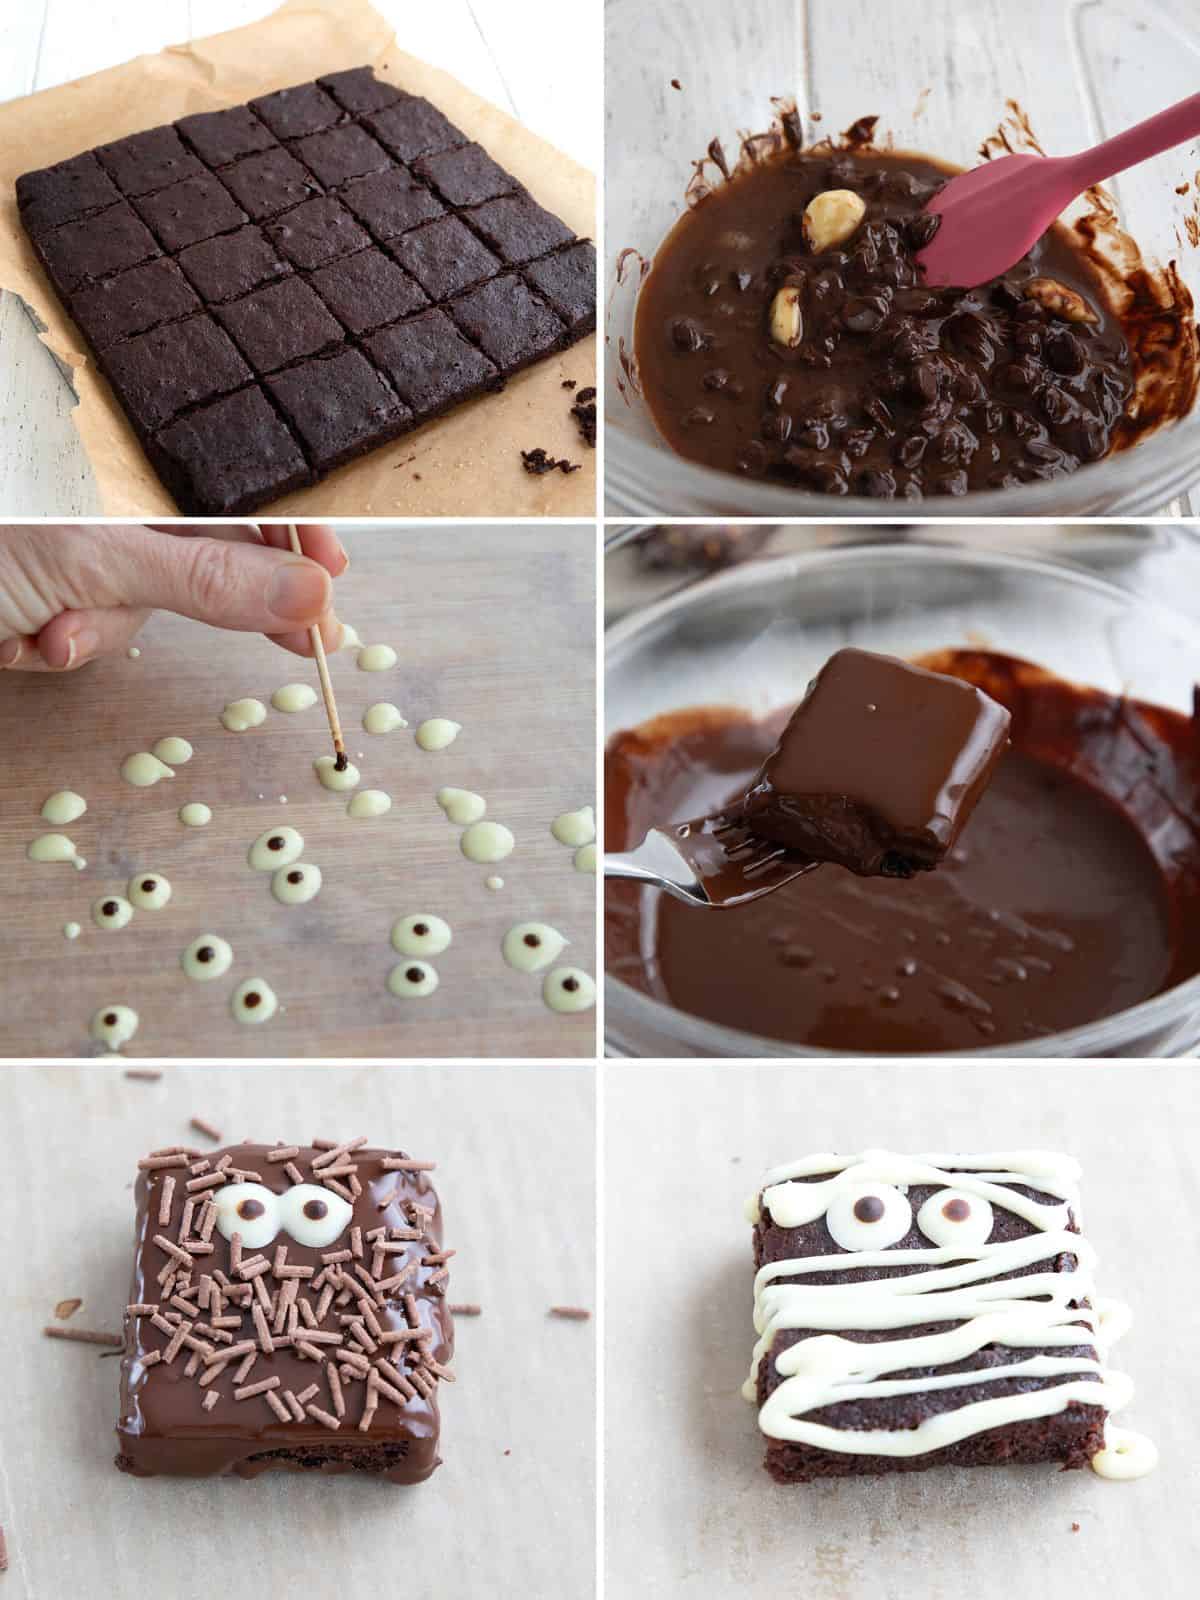 A collage of 6 images showing how to decorate keto brownies for Halloween.